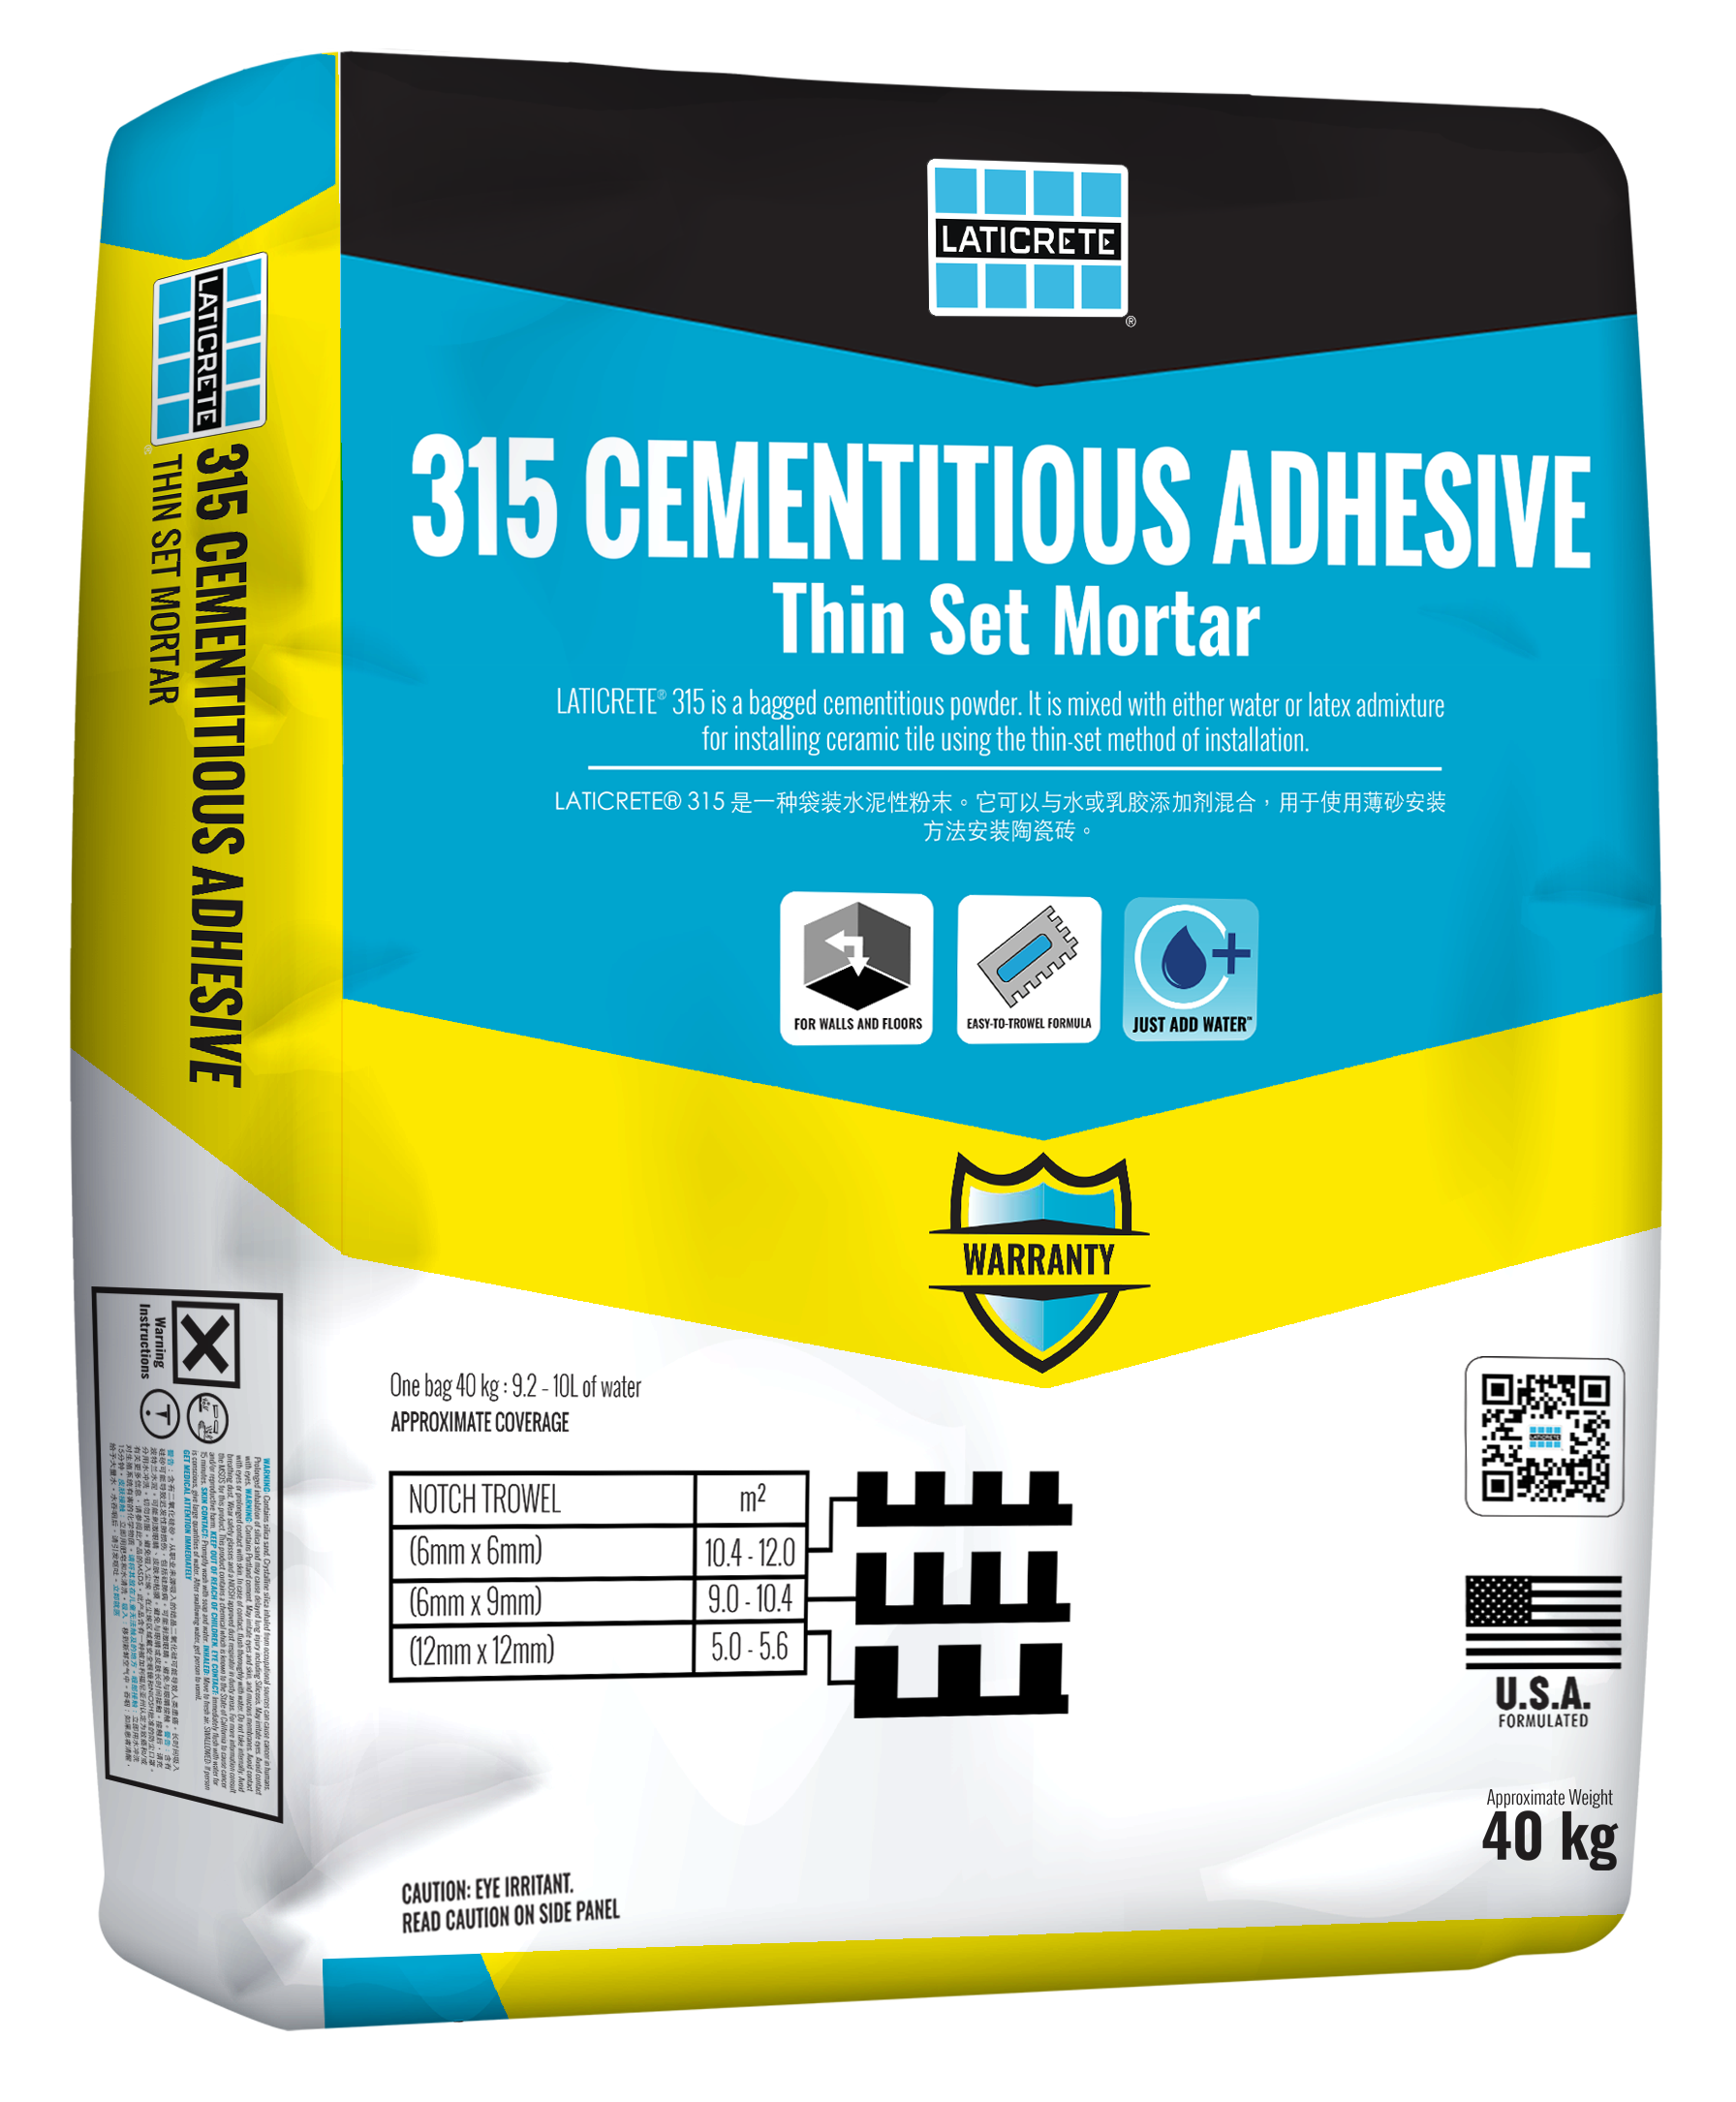 315 Cementitious Adhesive